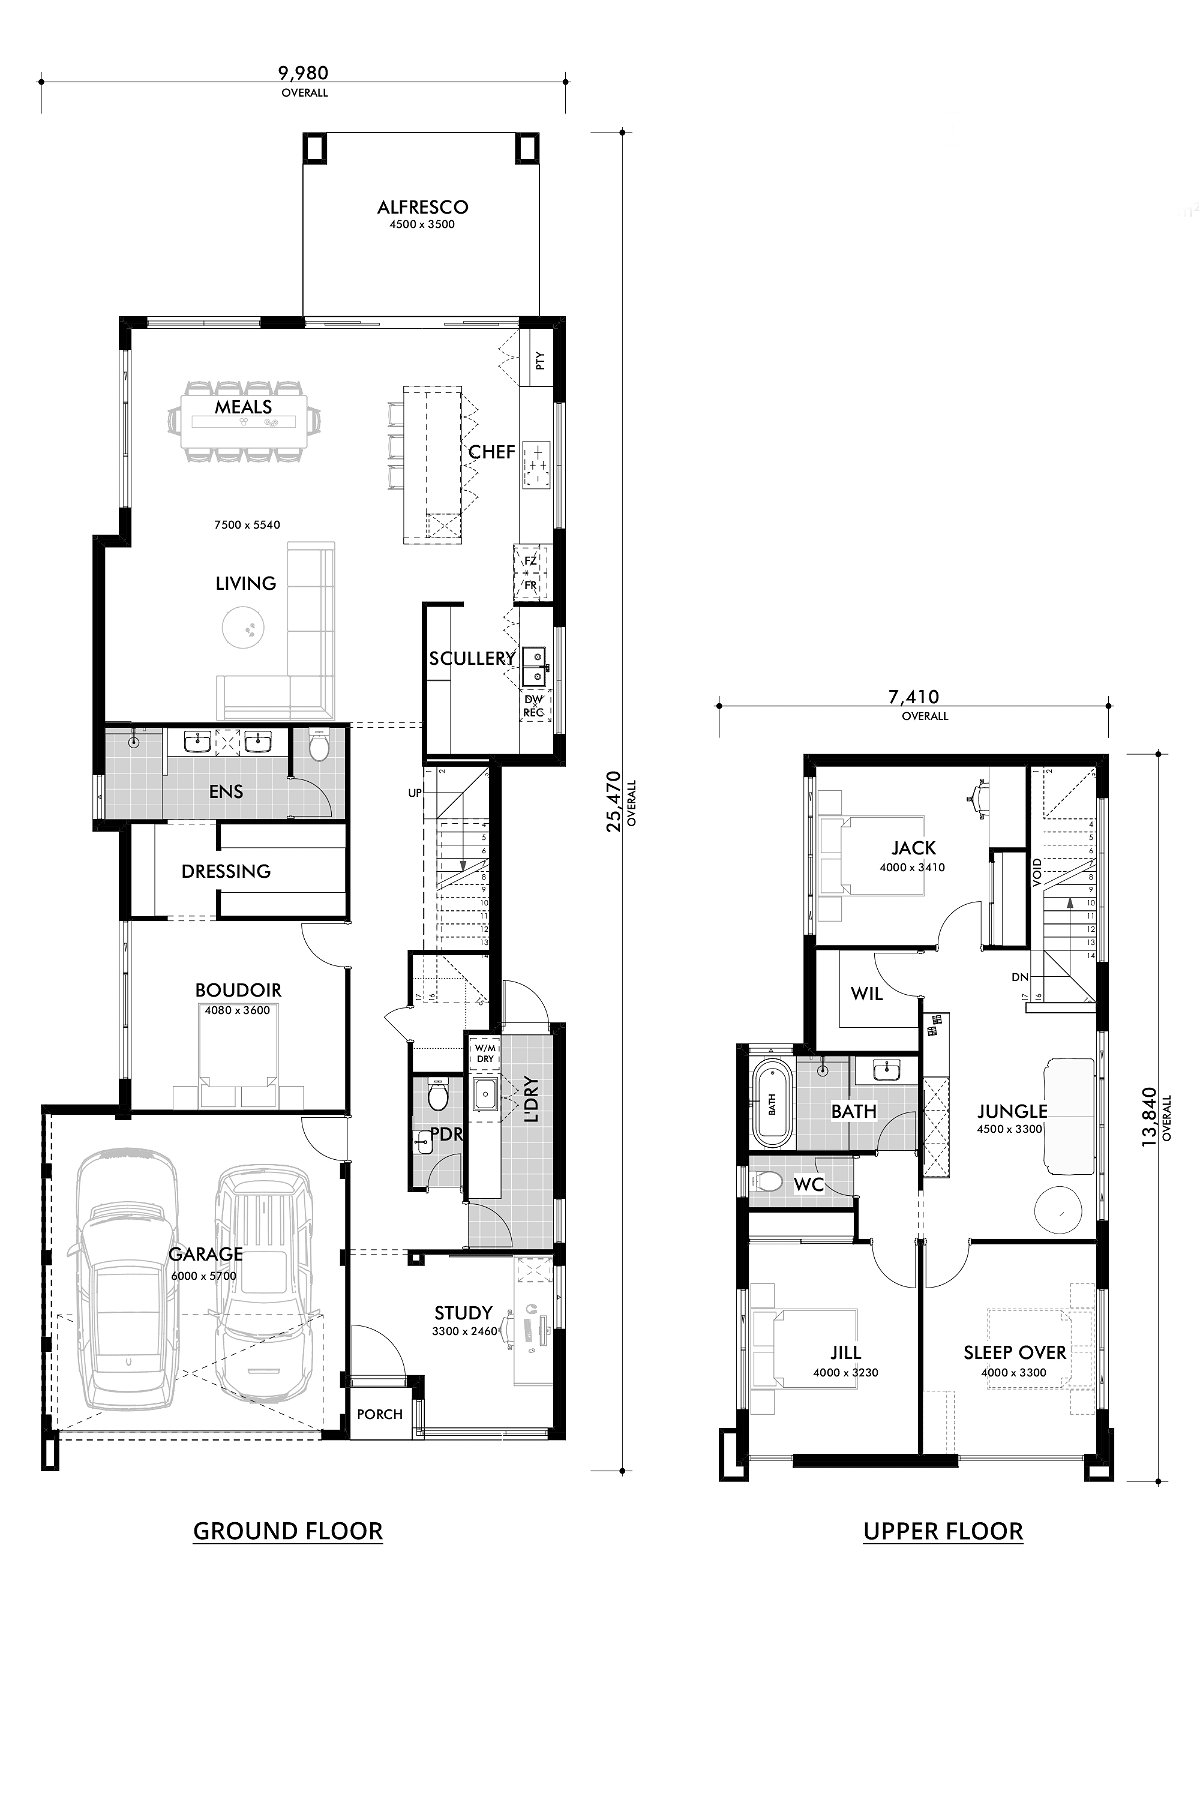 Residential Attitudes - The Kids Are Alright - Floorplan - The Kids Are Alright Floorplan Website